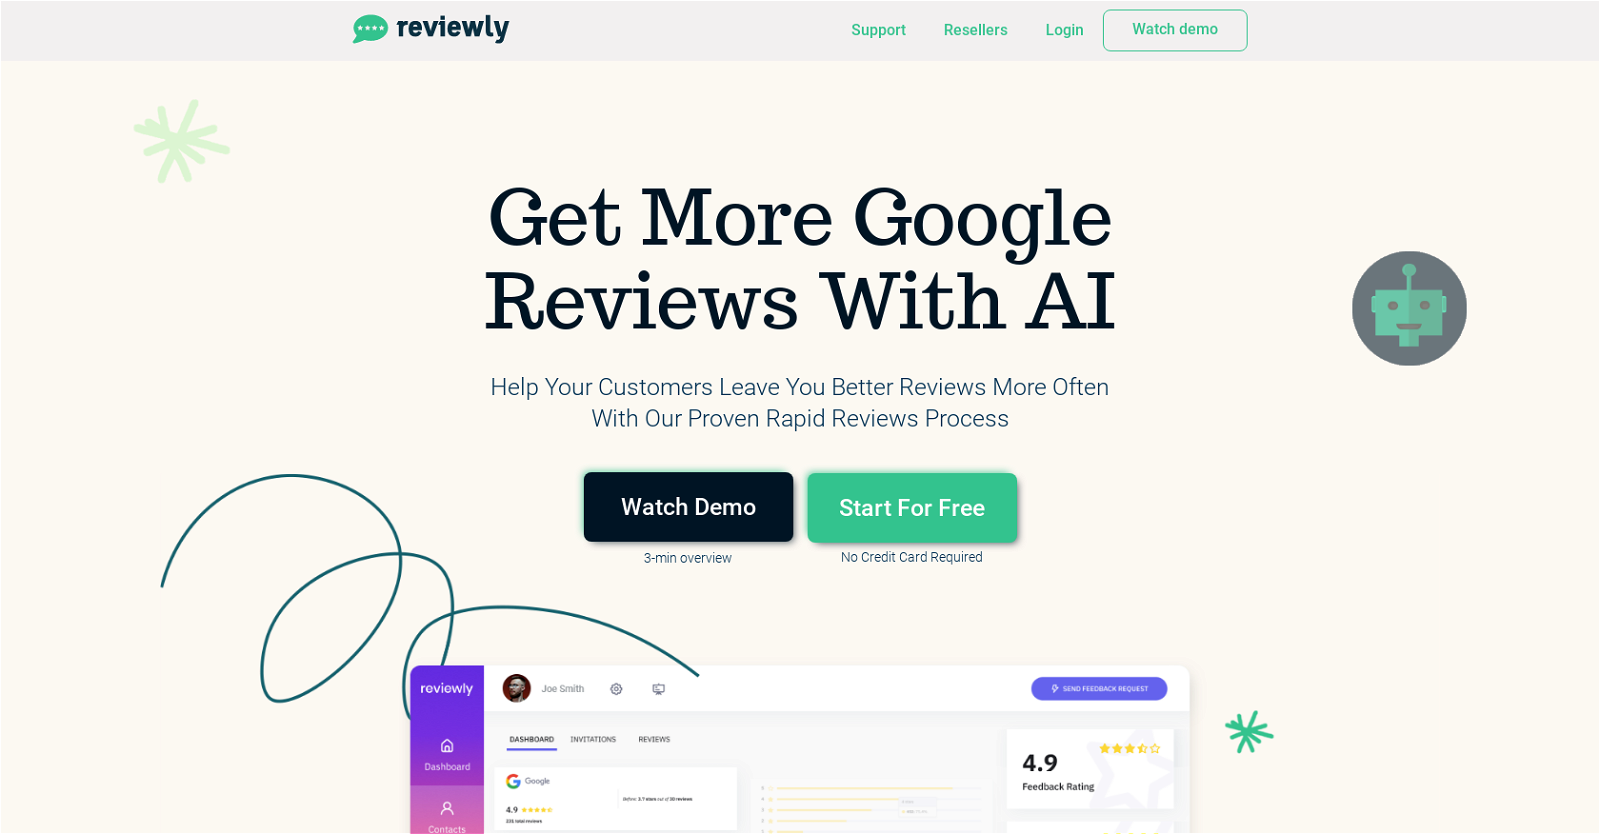 Reviewly